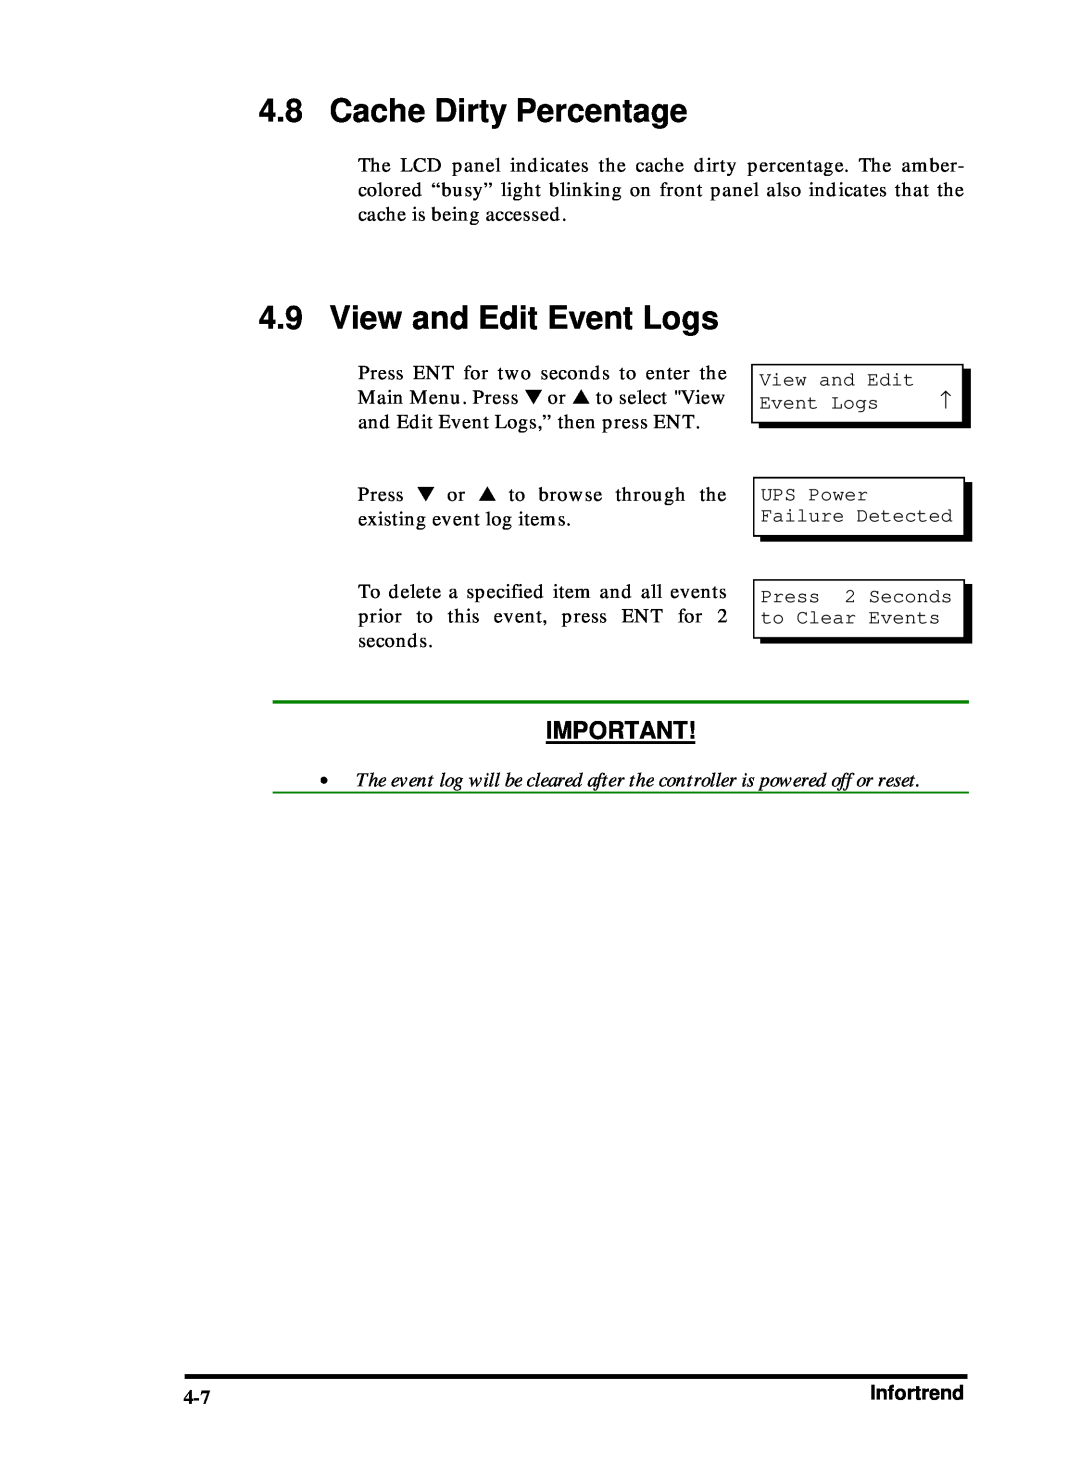 Compaq Infortrend manual Cache Dirty Percentage, View and Edit Event Logs 